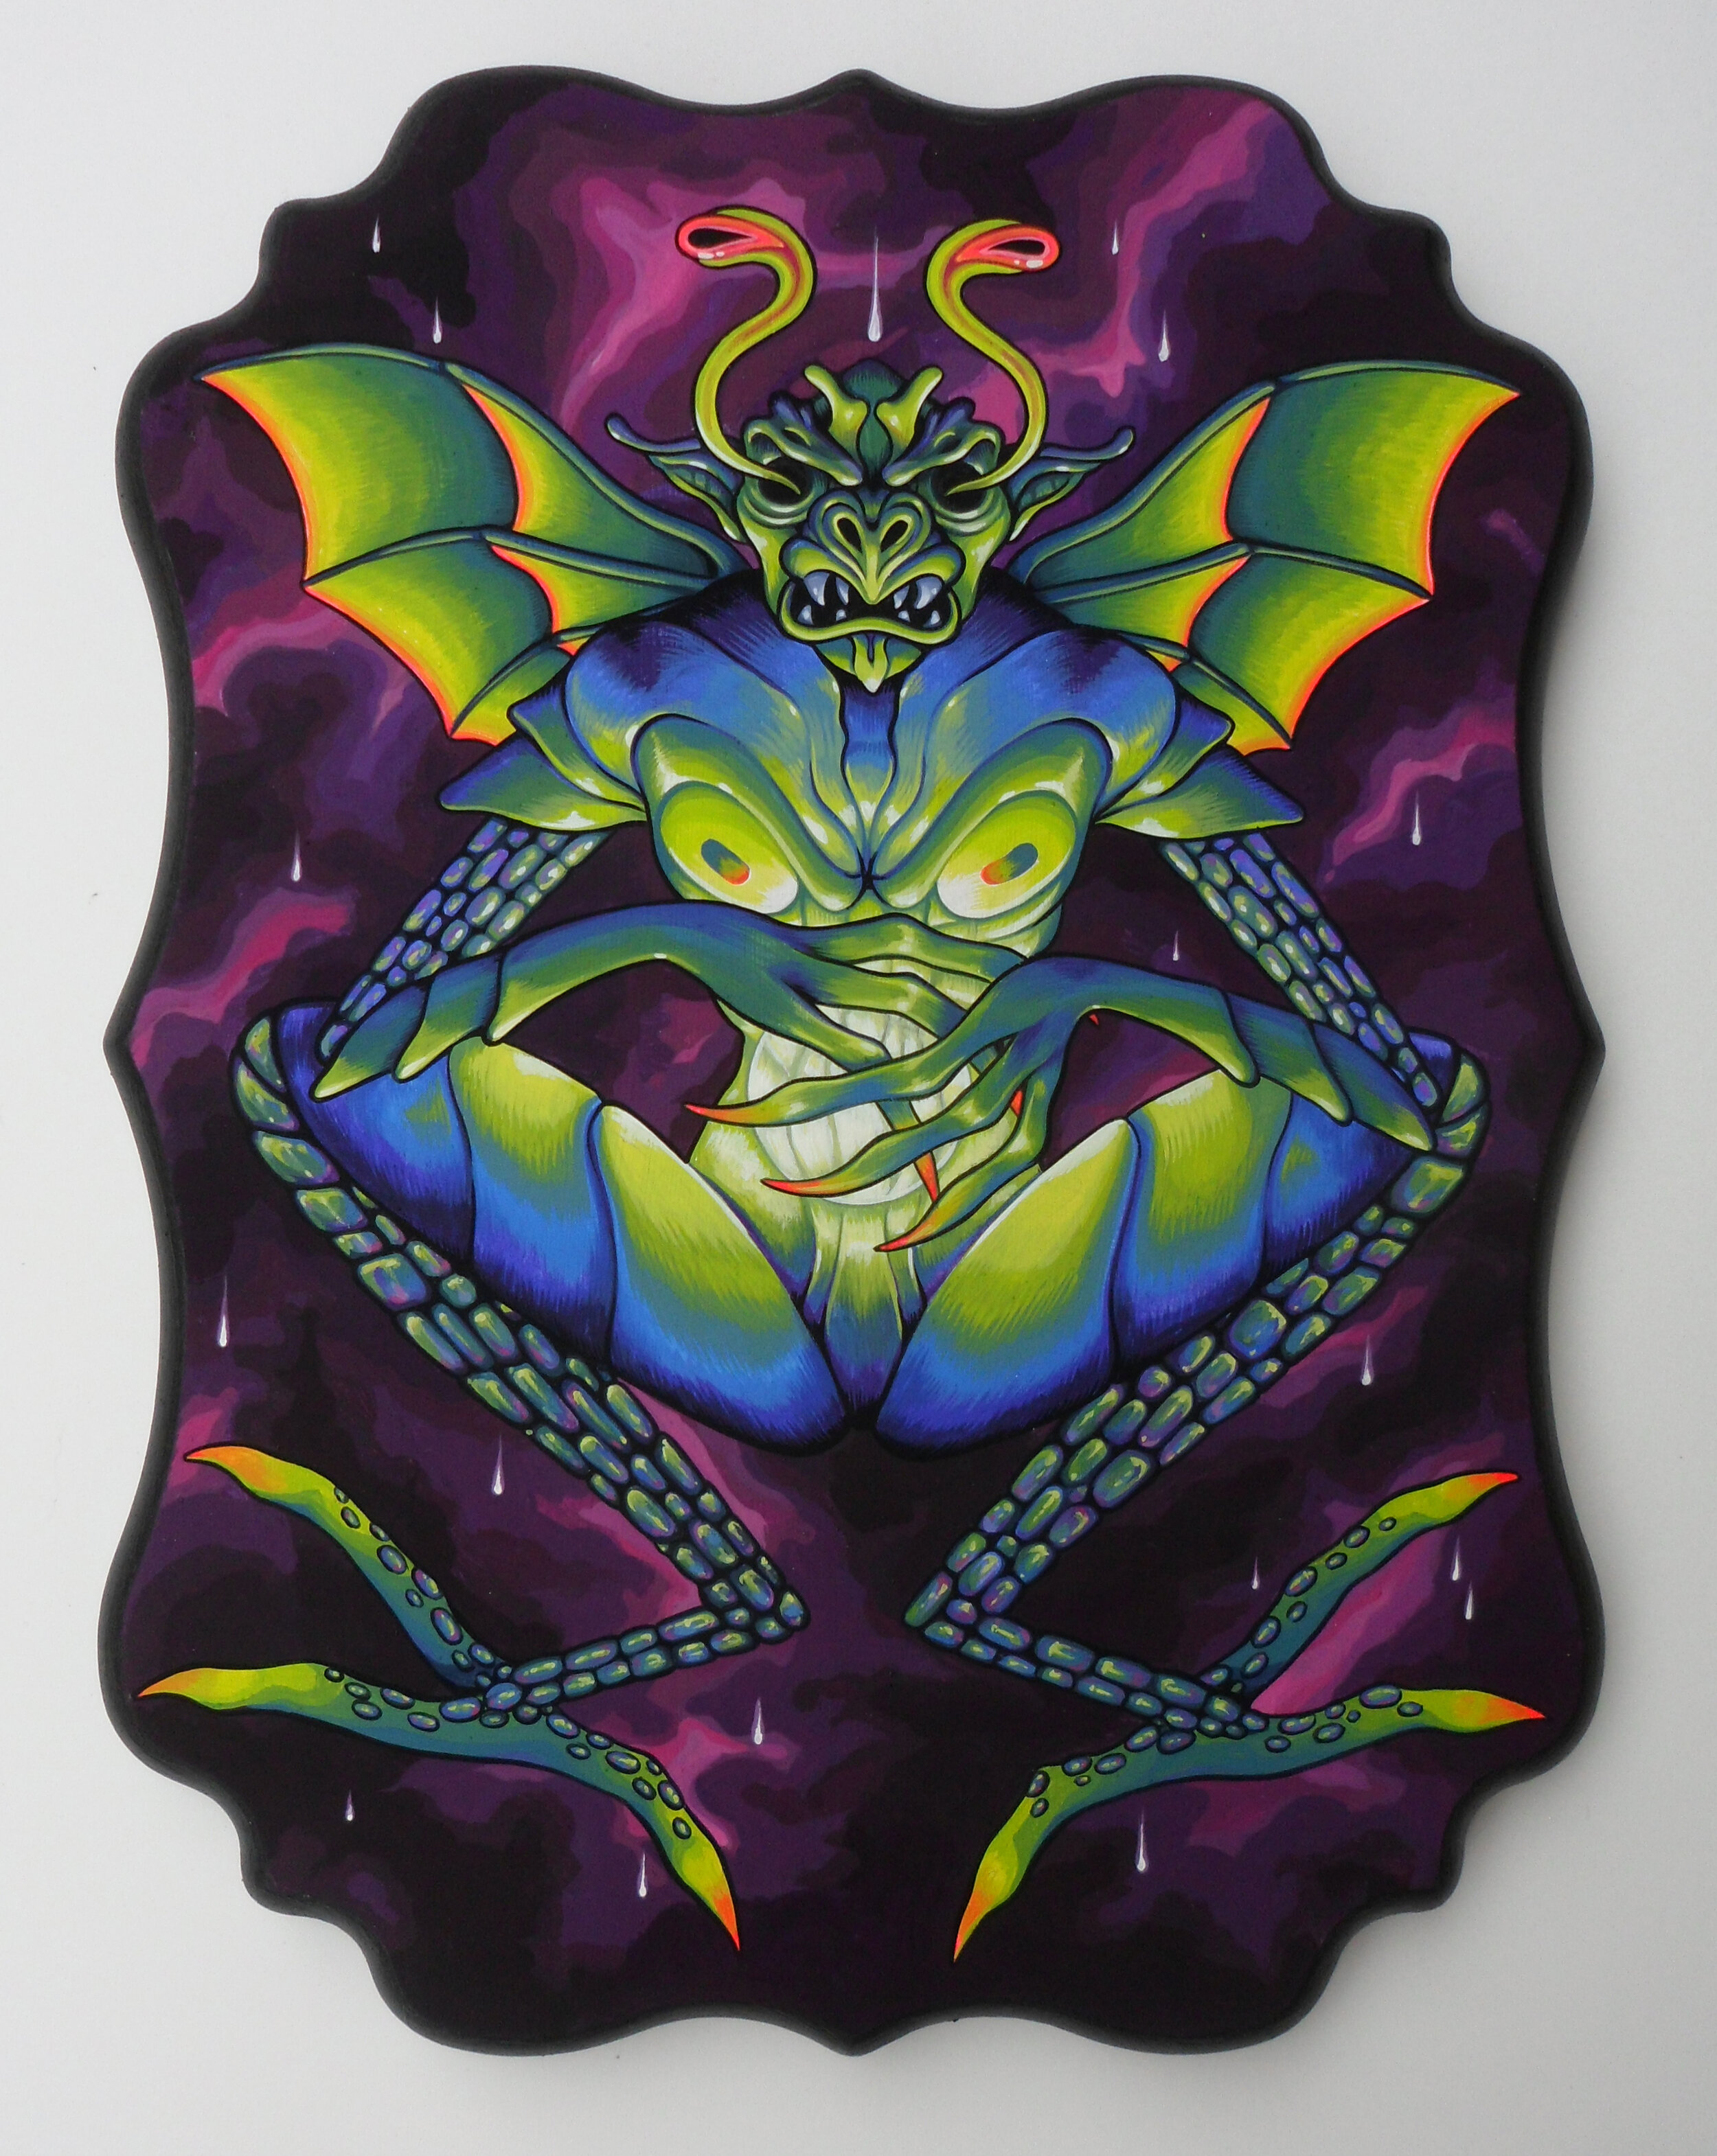  “Protector” acryla gouache on wood panel. For Beautiful Monsters group show 